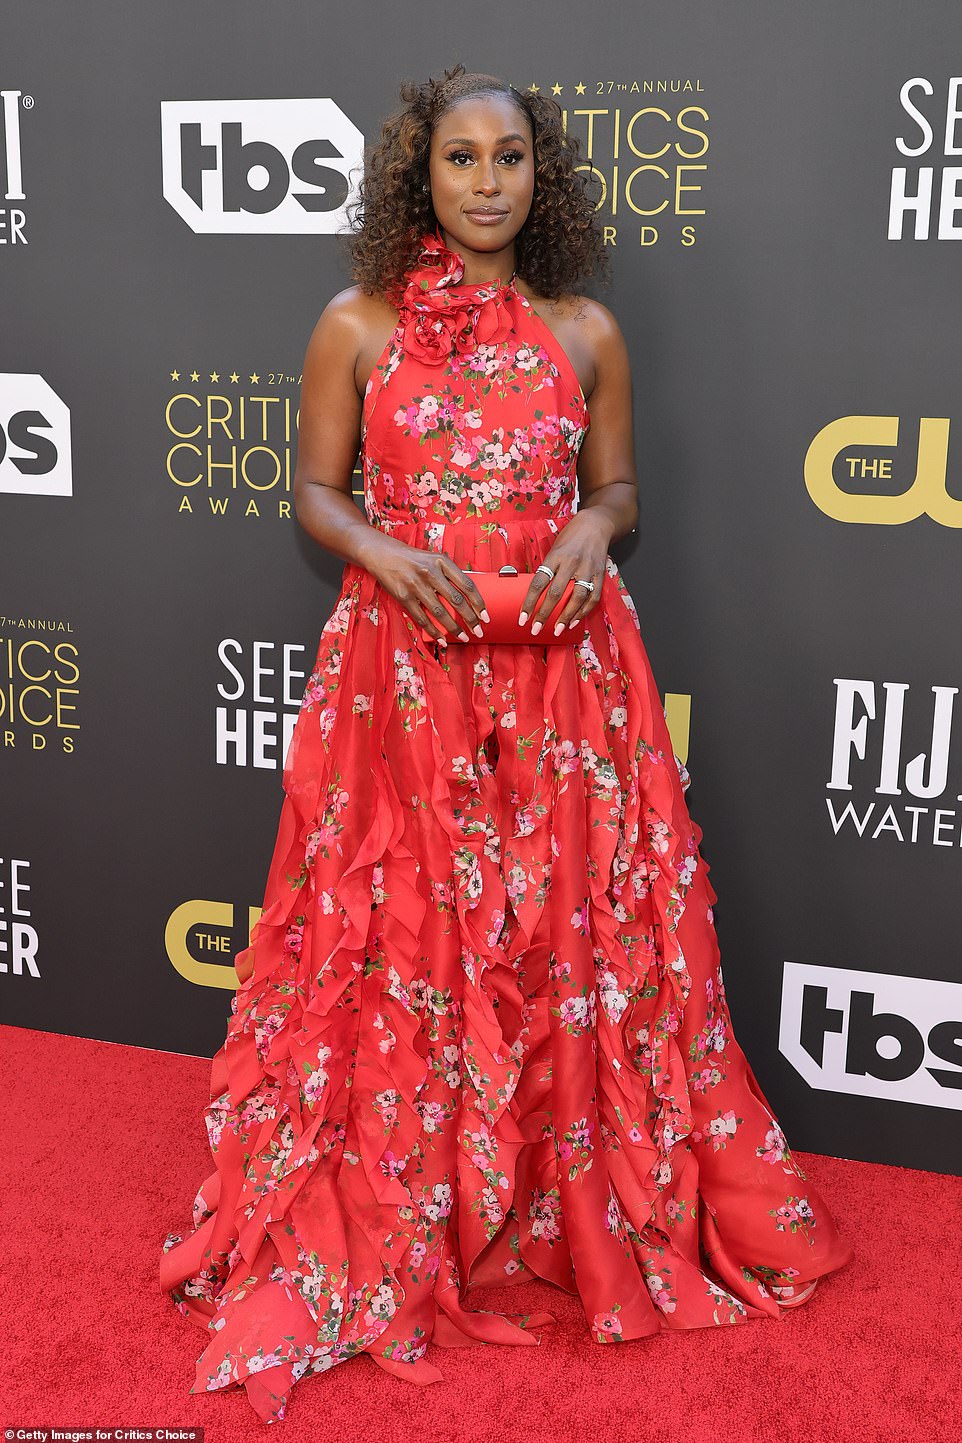 Spring is ready: Issa Rae looked beautiful in a bright red floral dress with floral motifs along the halter neckline.